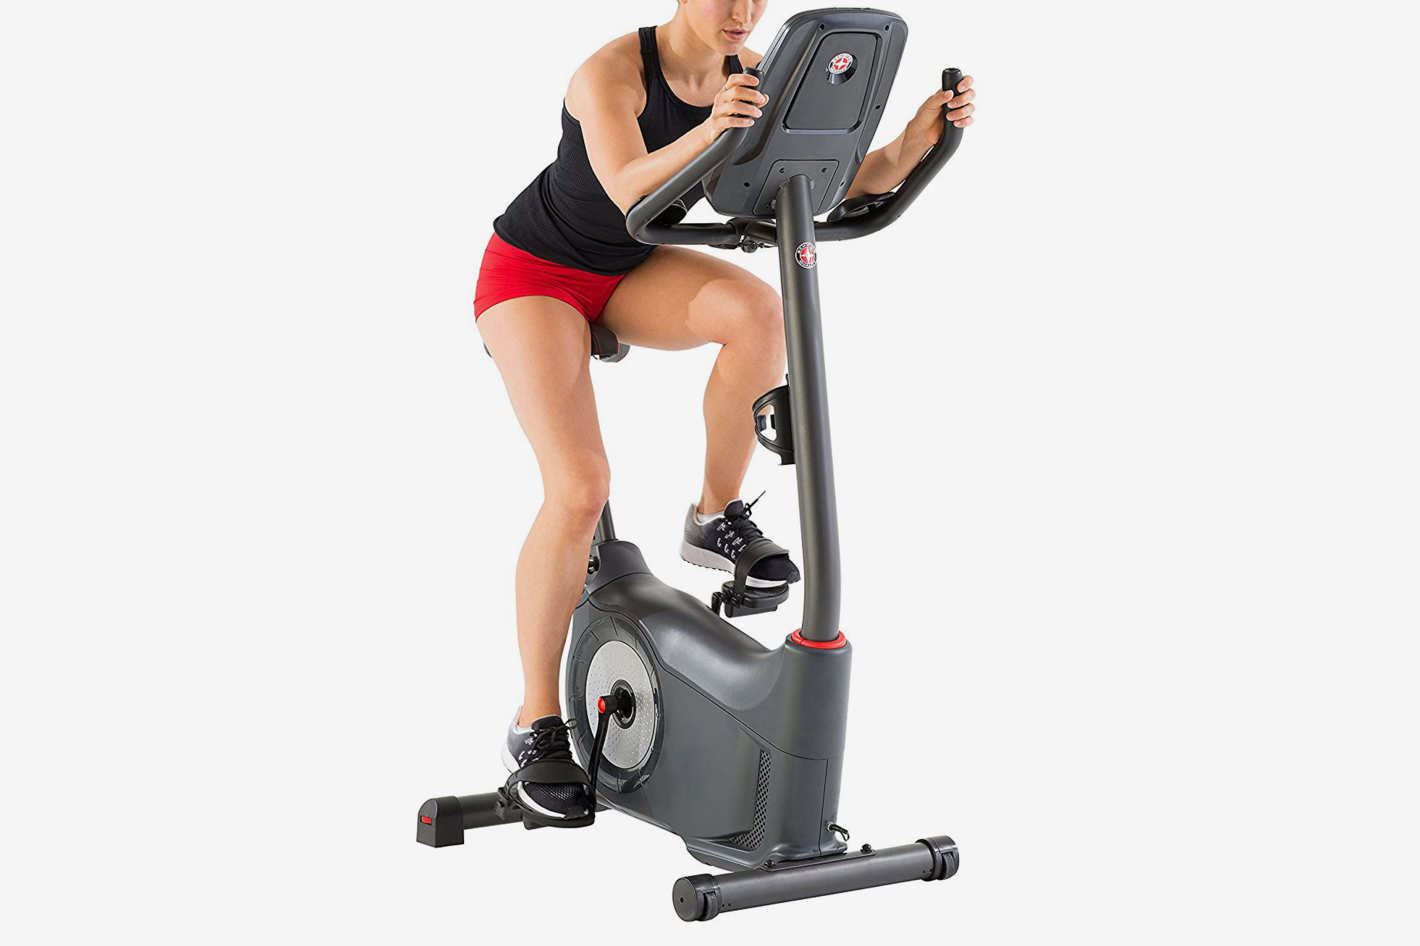 How to properly Maintain Indoor Exercise Bikes